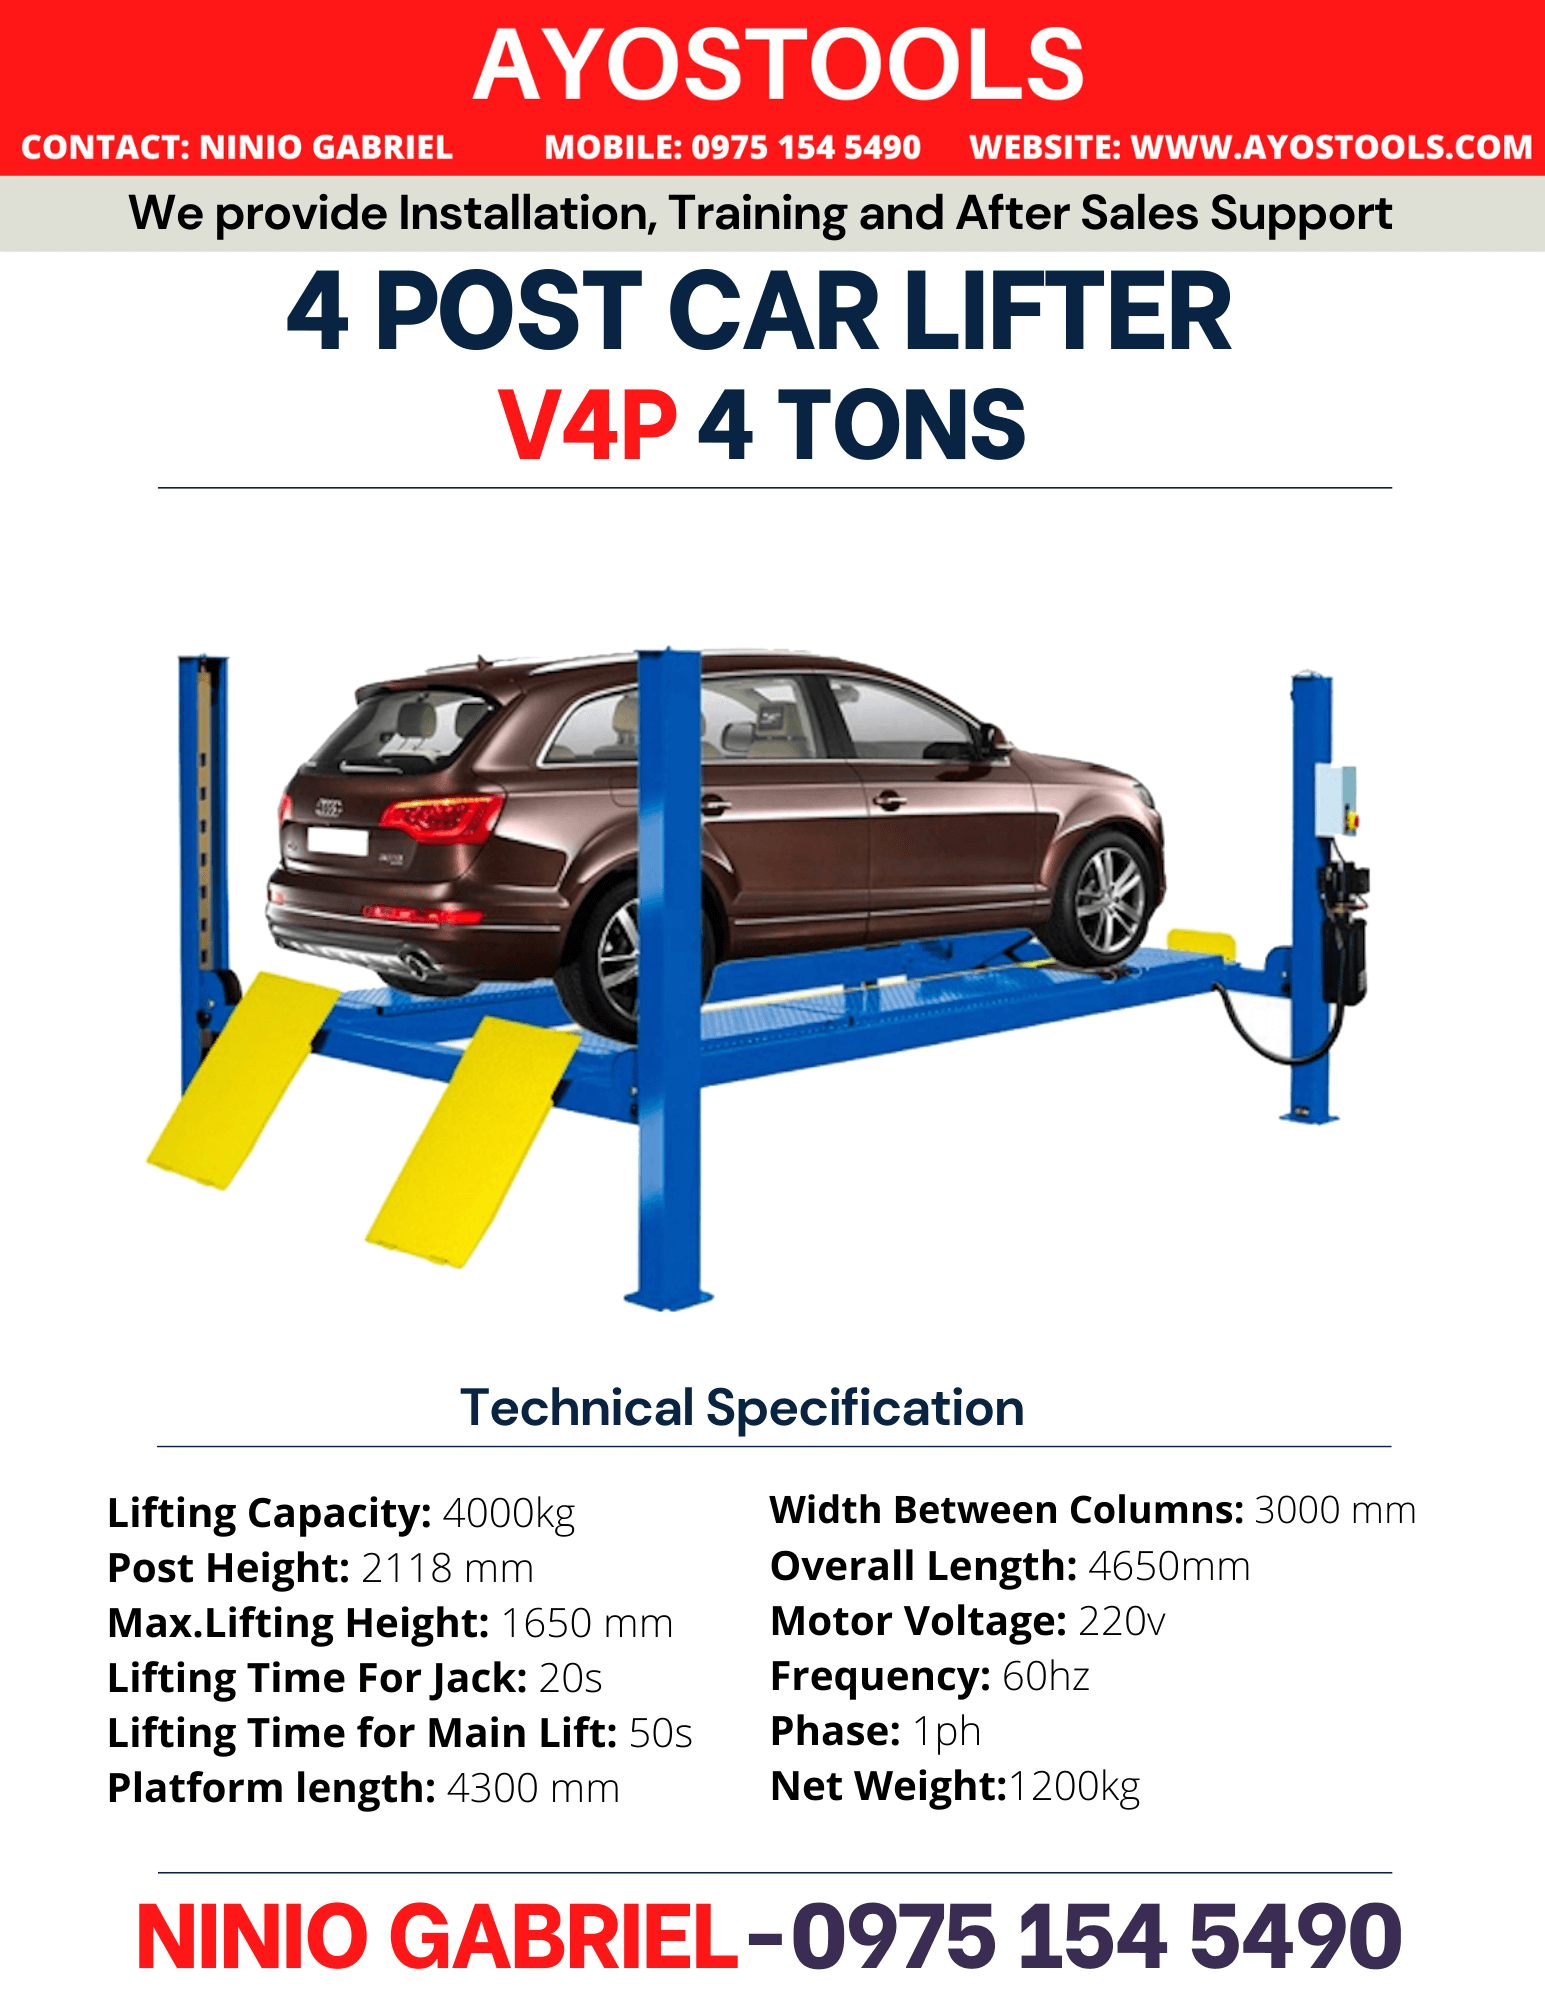 4 Tons 4 Post Car Lifter Dealer in the Philippines